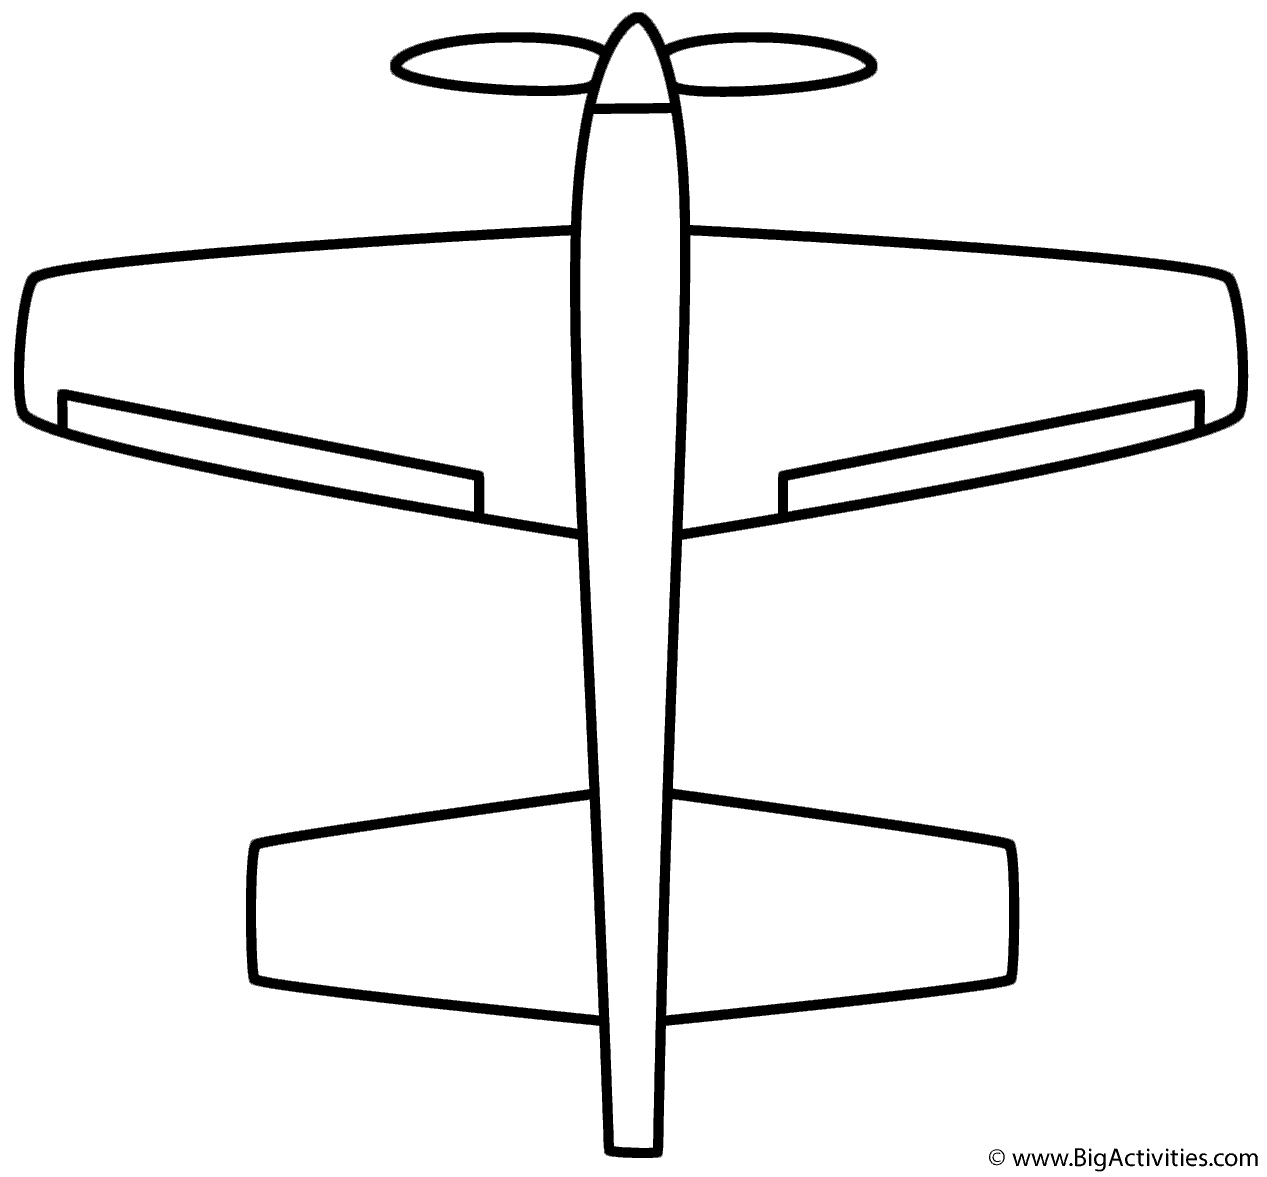 Download Simple Airplane Coloring Pages Coloring And Drawing